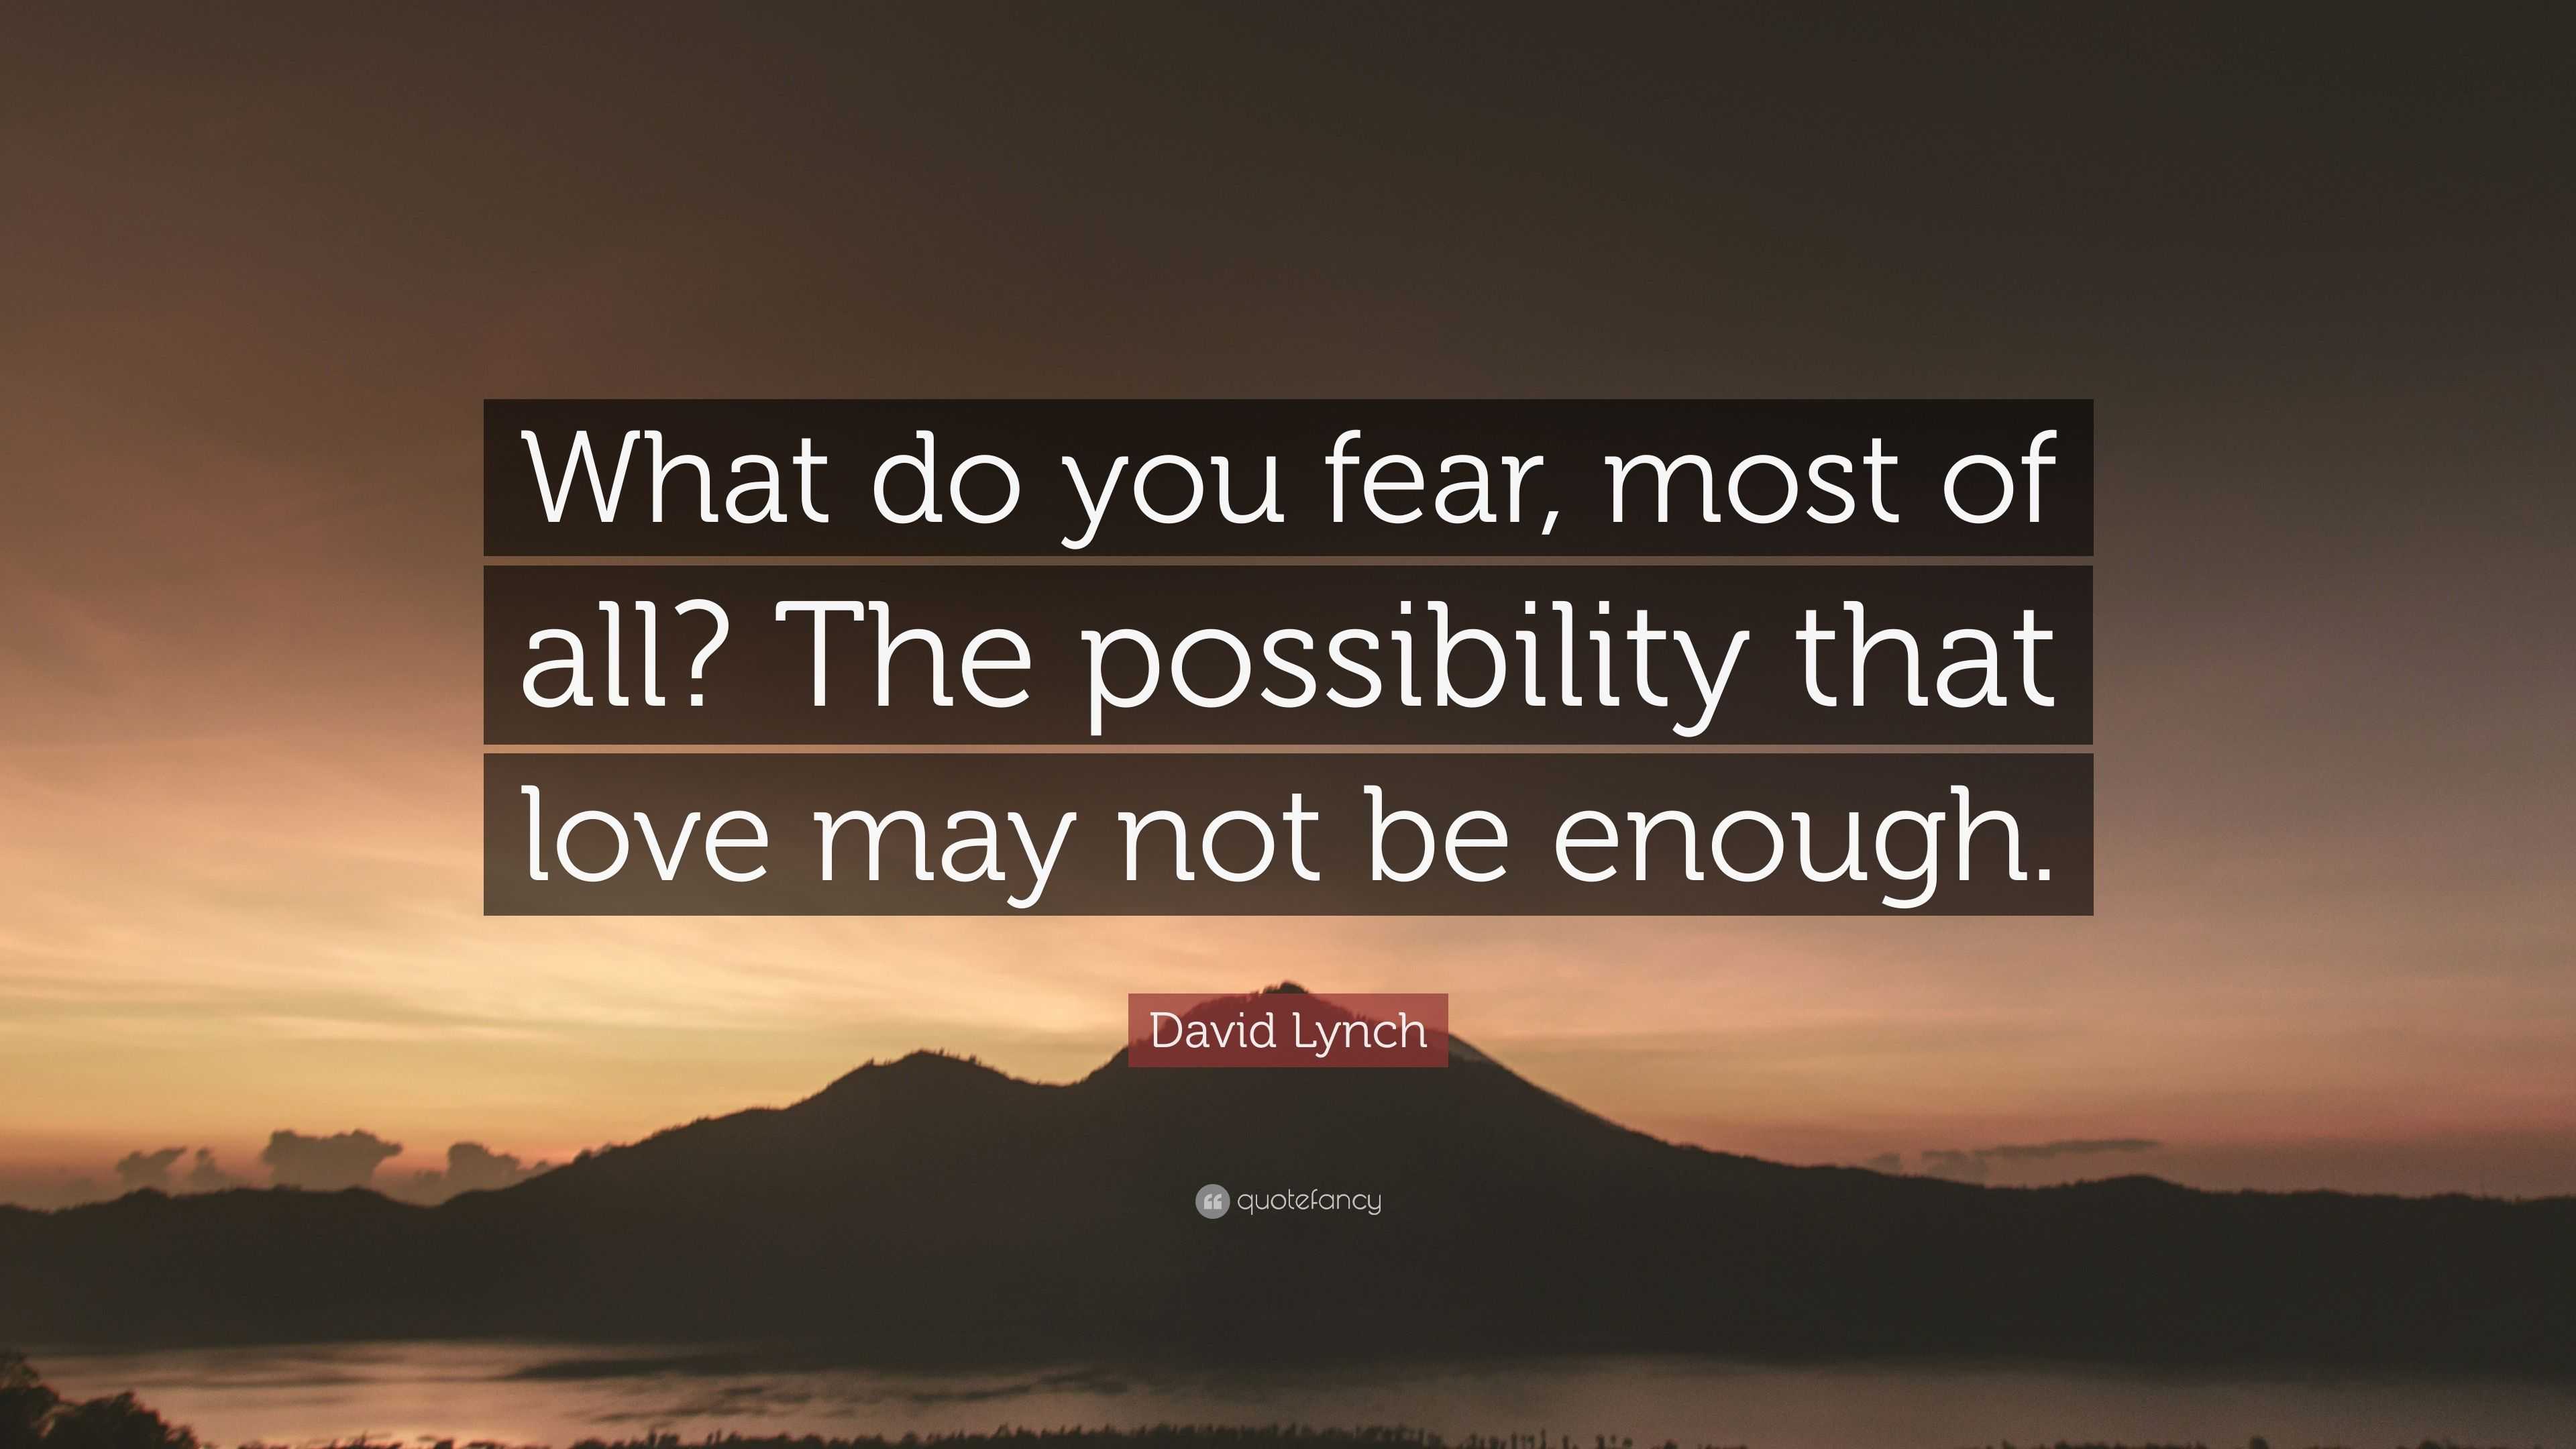 David Lynch Quote: “What do you fear, most of all? The possibility that ...